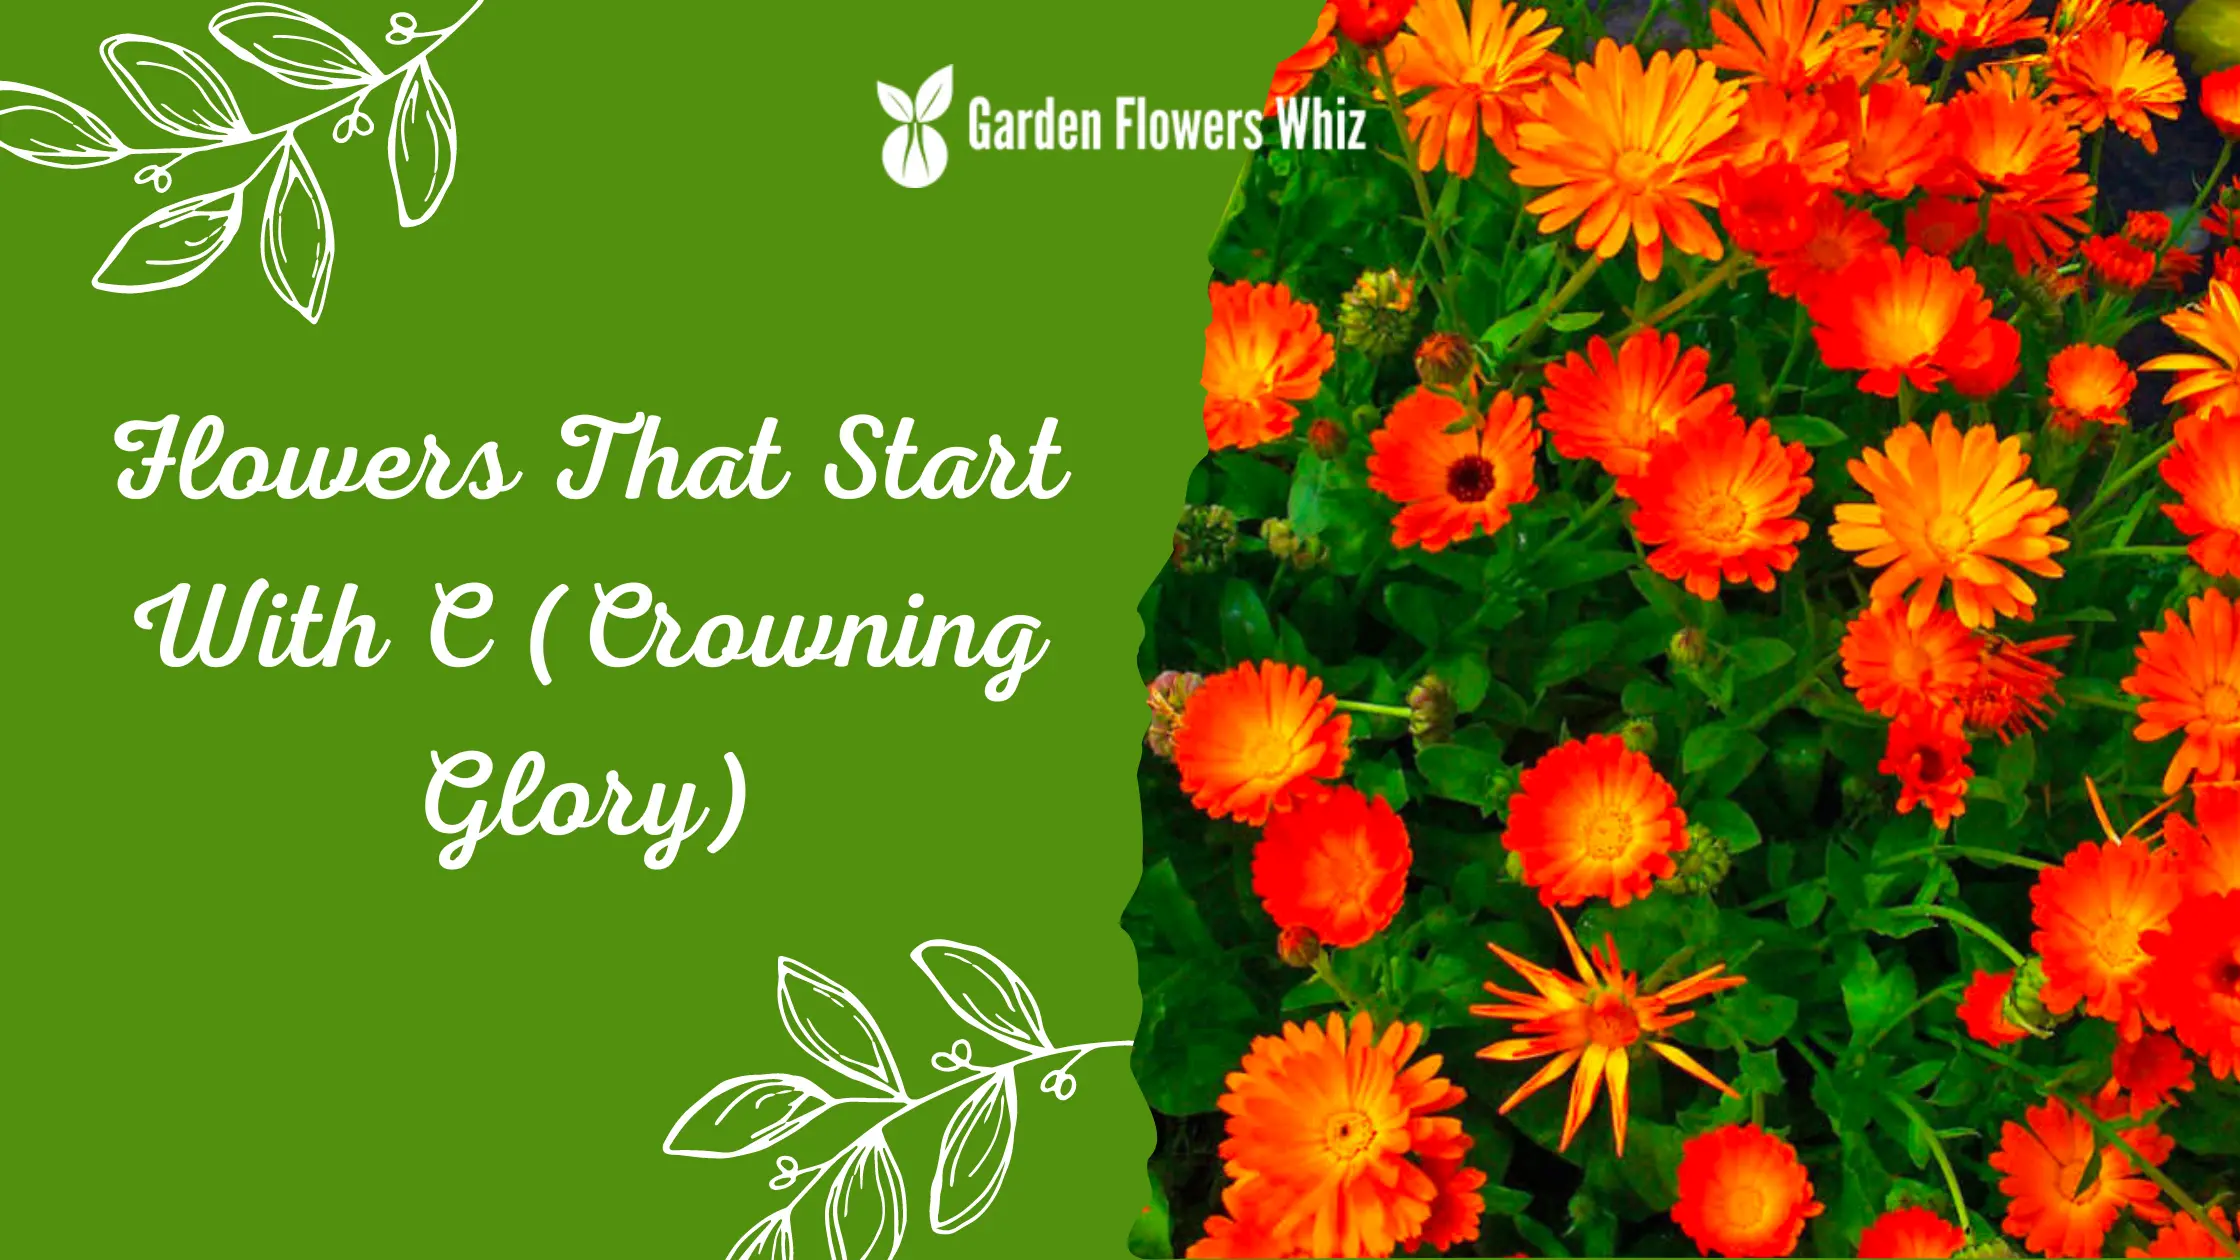 Flowers That Start With C (Crowning Glory)